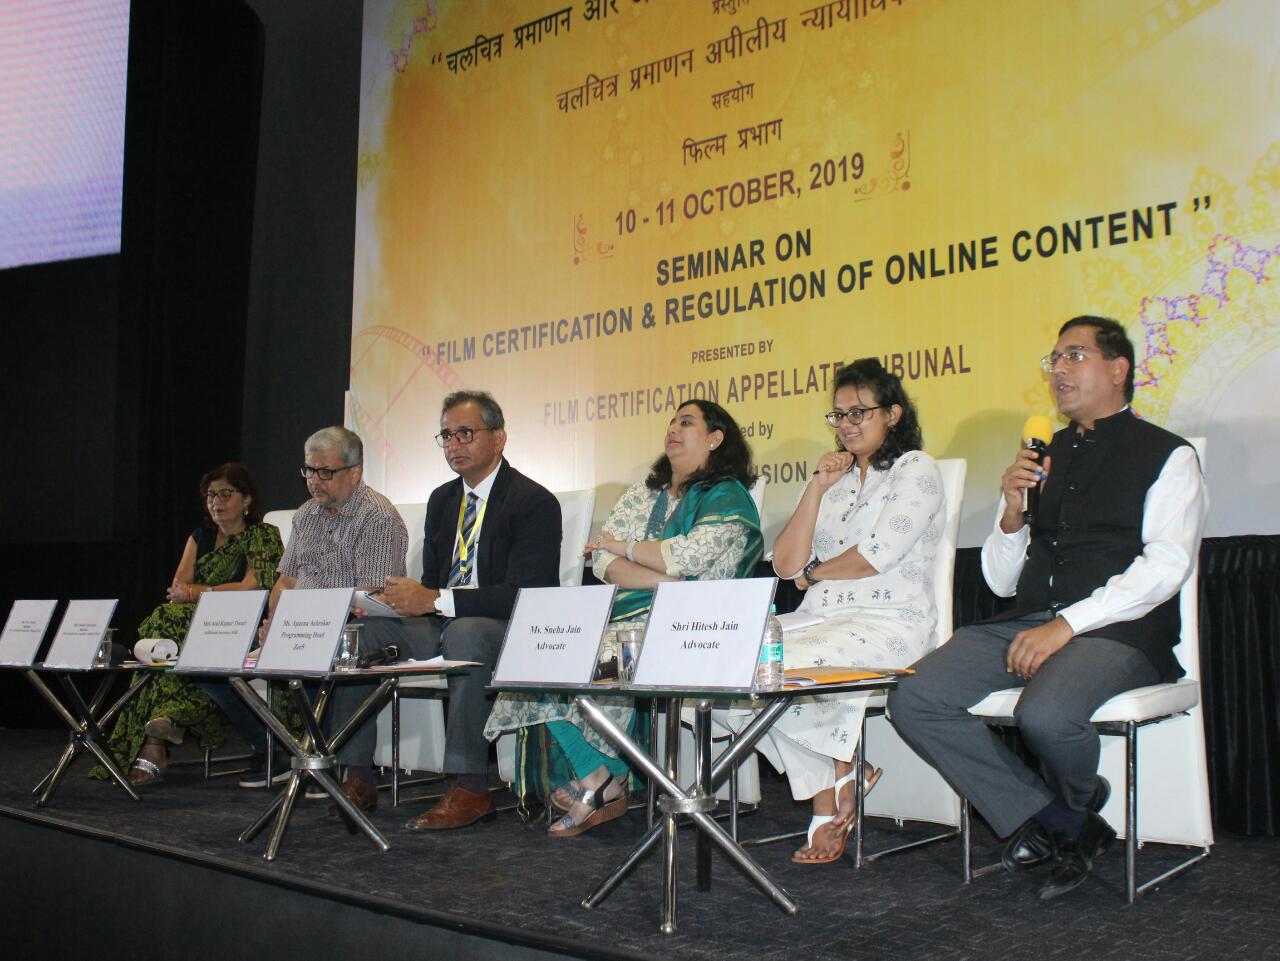 Seminar on Film Certification and Regulation of Online Content